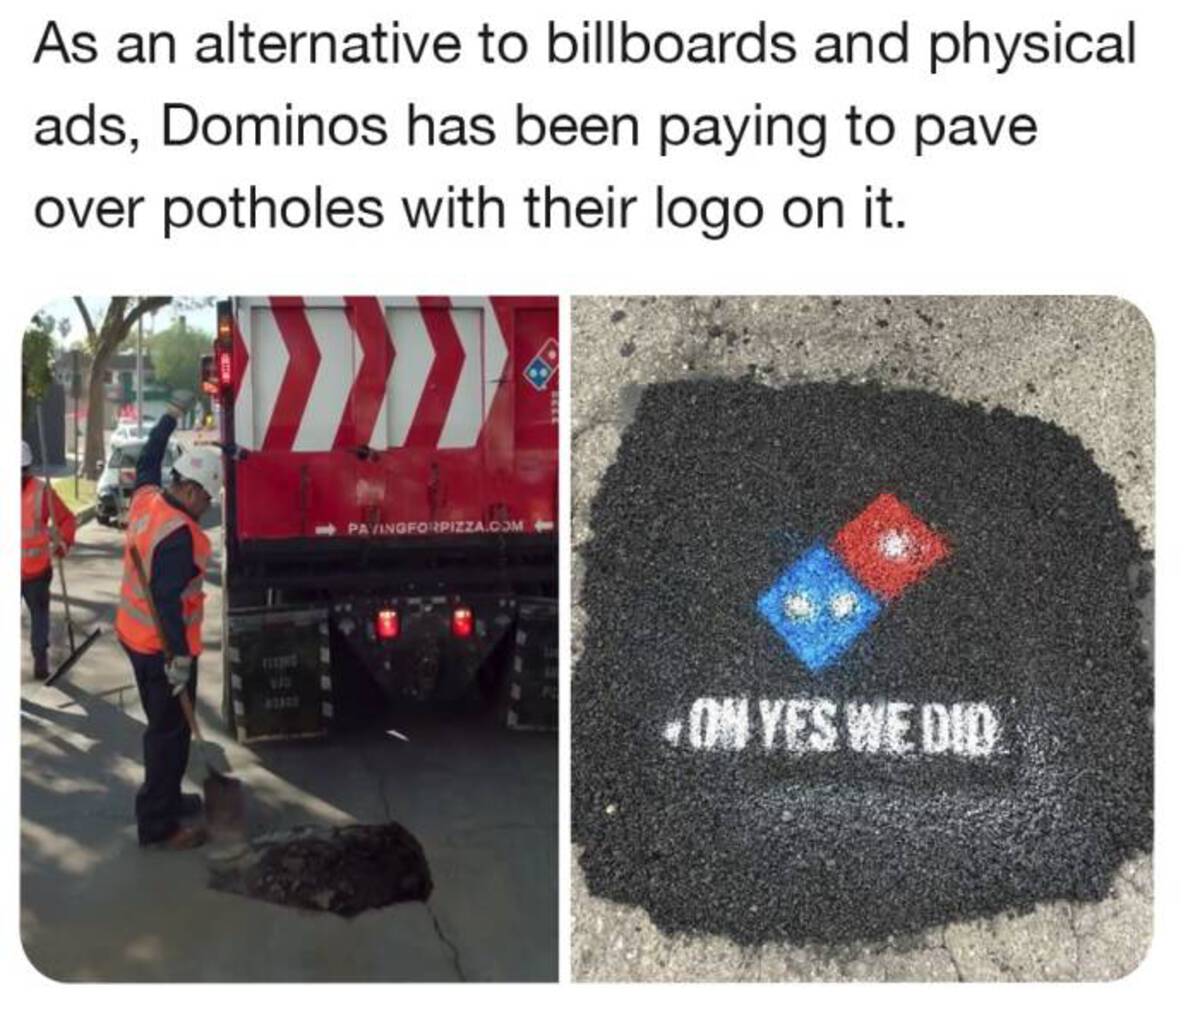 Domino's Pizza - As an alternative to billboards and physical ads, Dominos has been paying to pave over potholes with their logo on it. 970 41300 Pavingforpizza.Com On Yes We Did